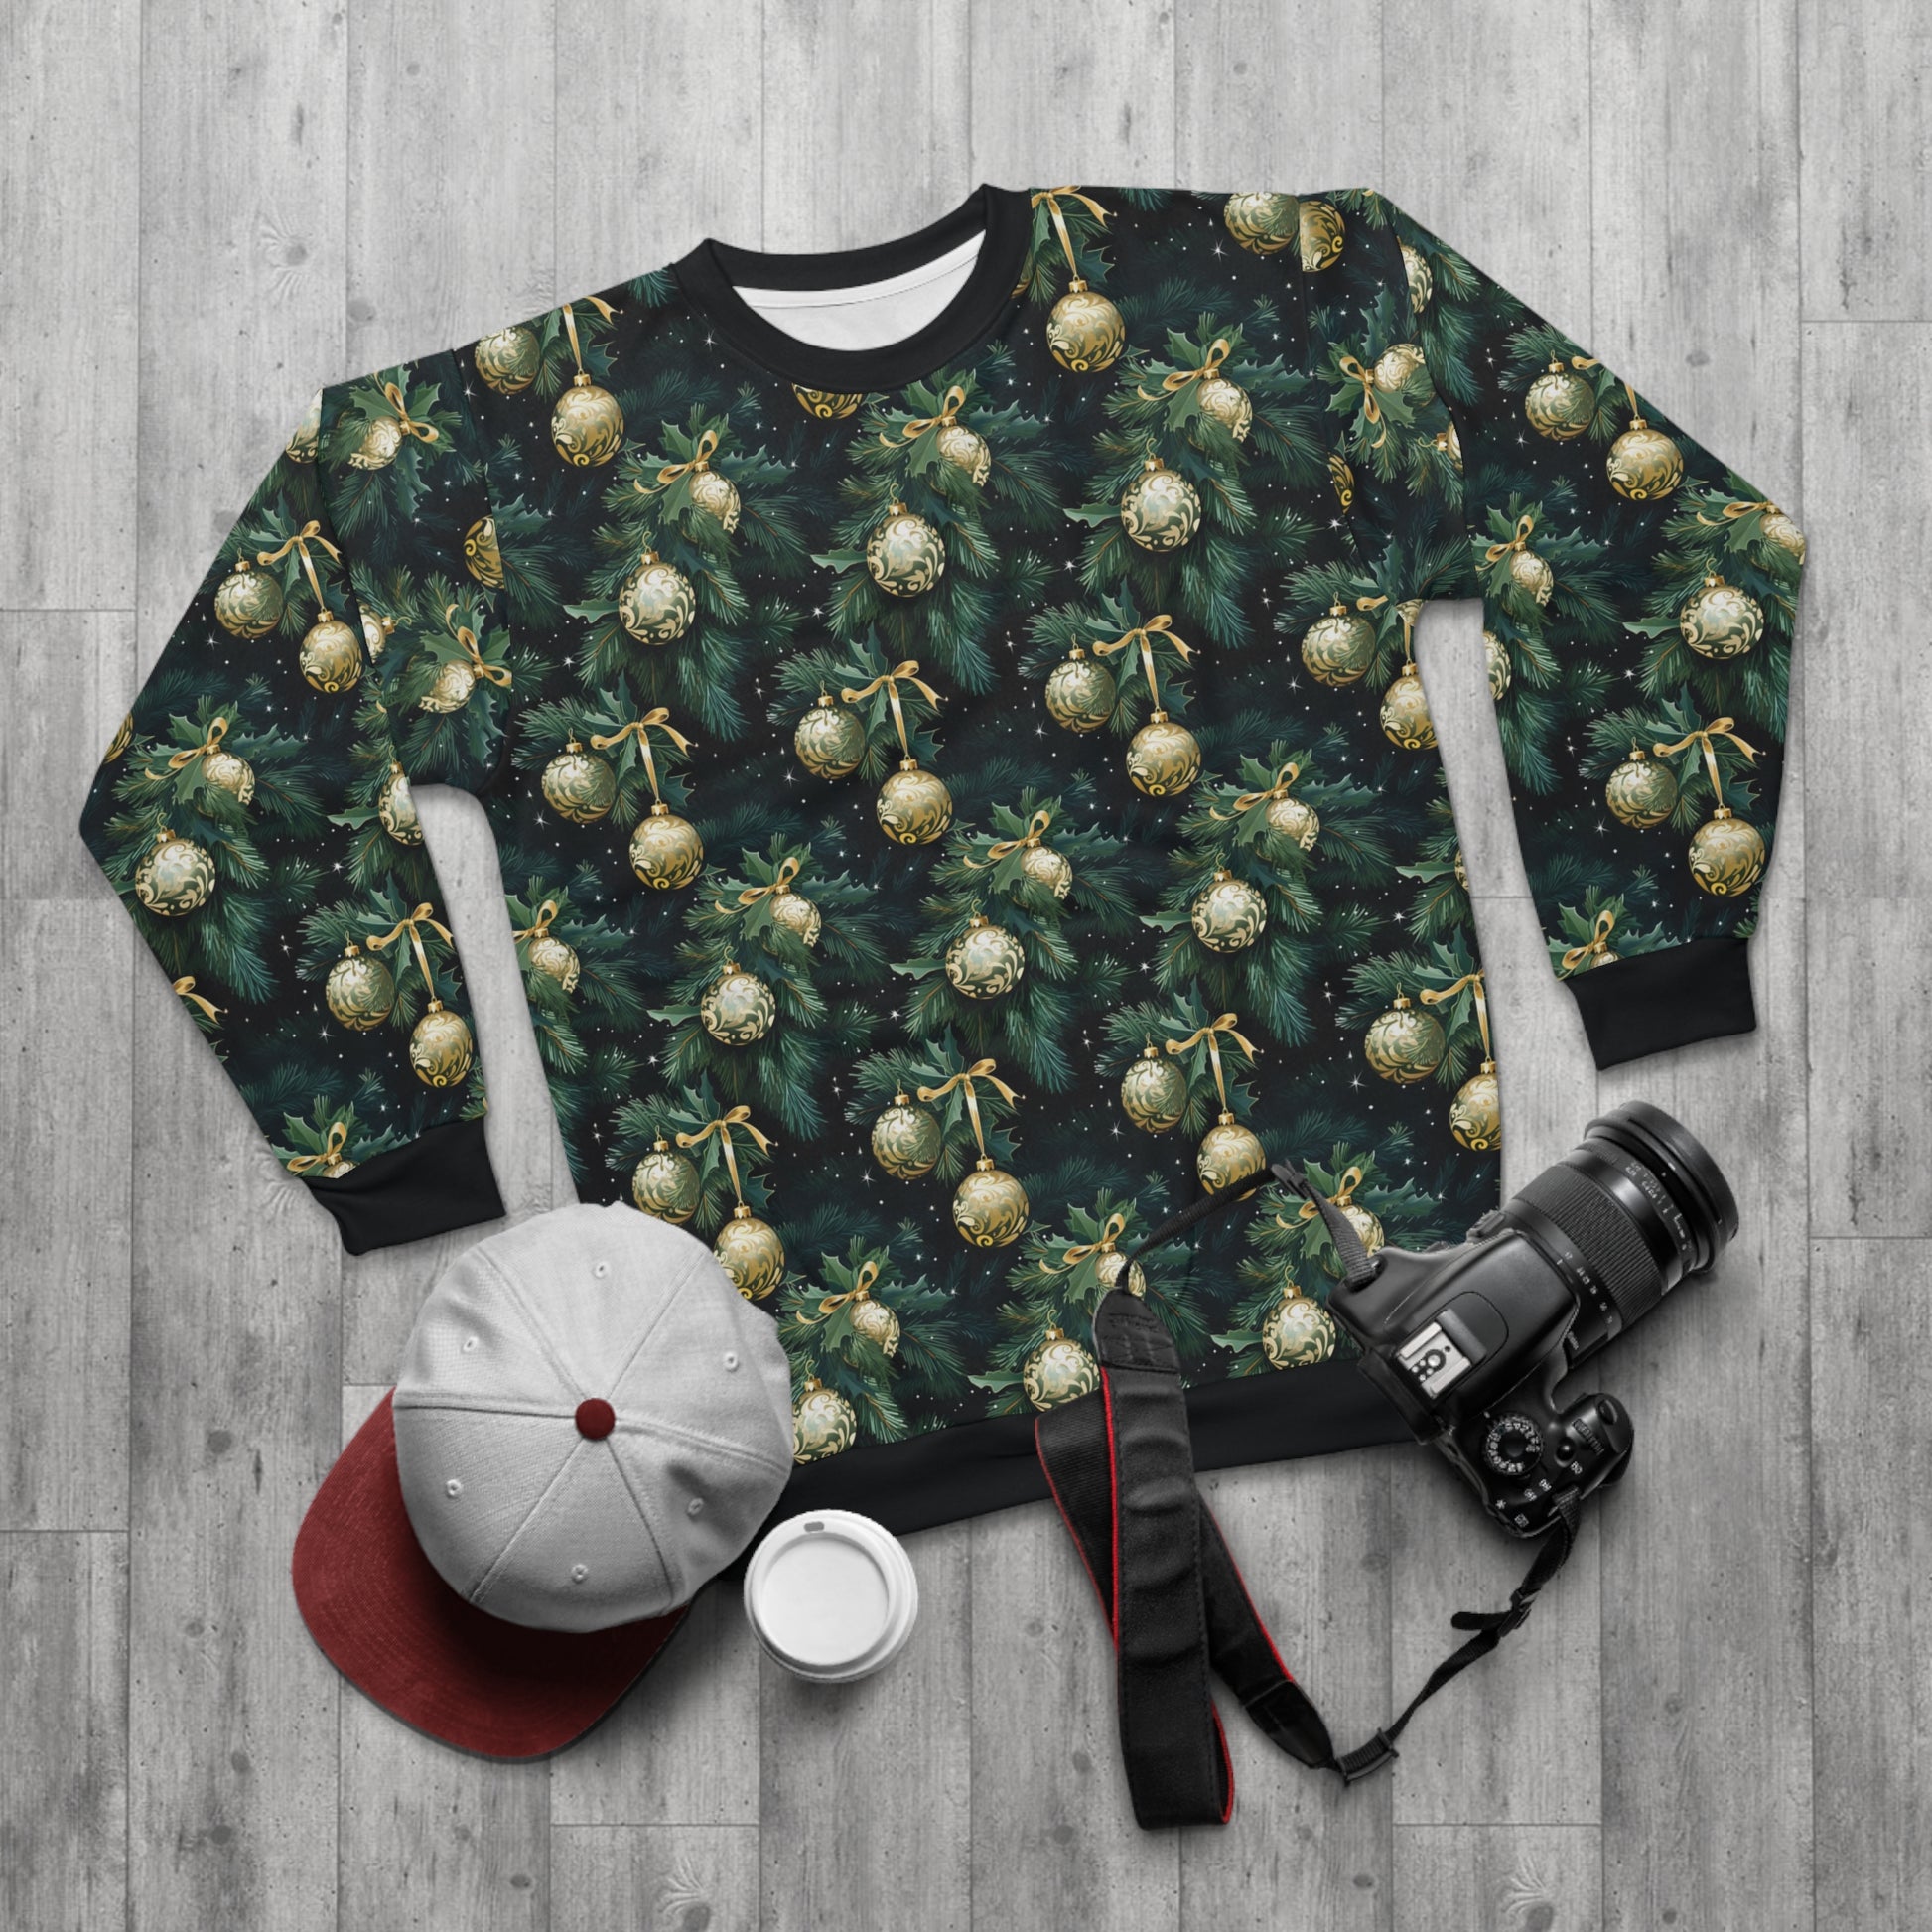 Ugly Christmas Sweater, Green Gold Bad Tacky Xmas Tree Print Women Men Vintage Funny Party Winter Holiday Outfit Sweatshirt Starcove Fashion